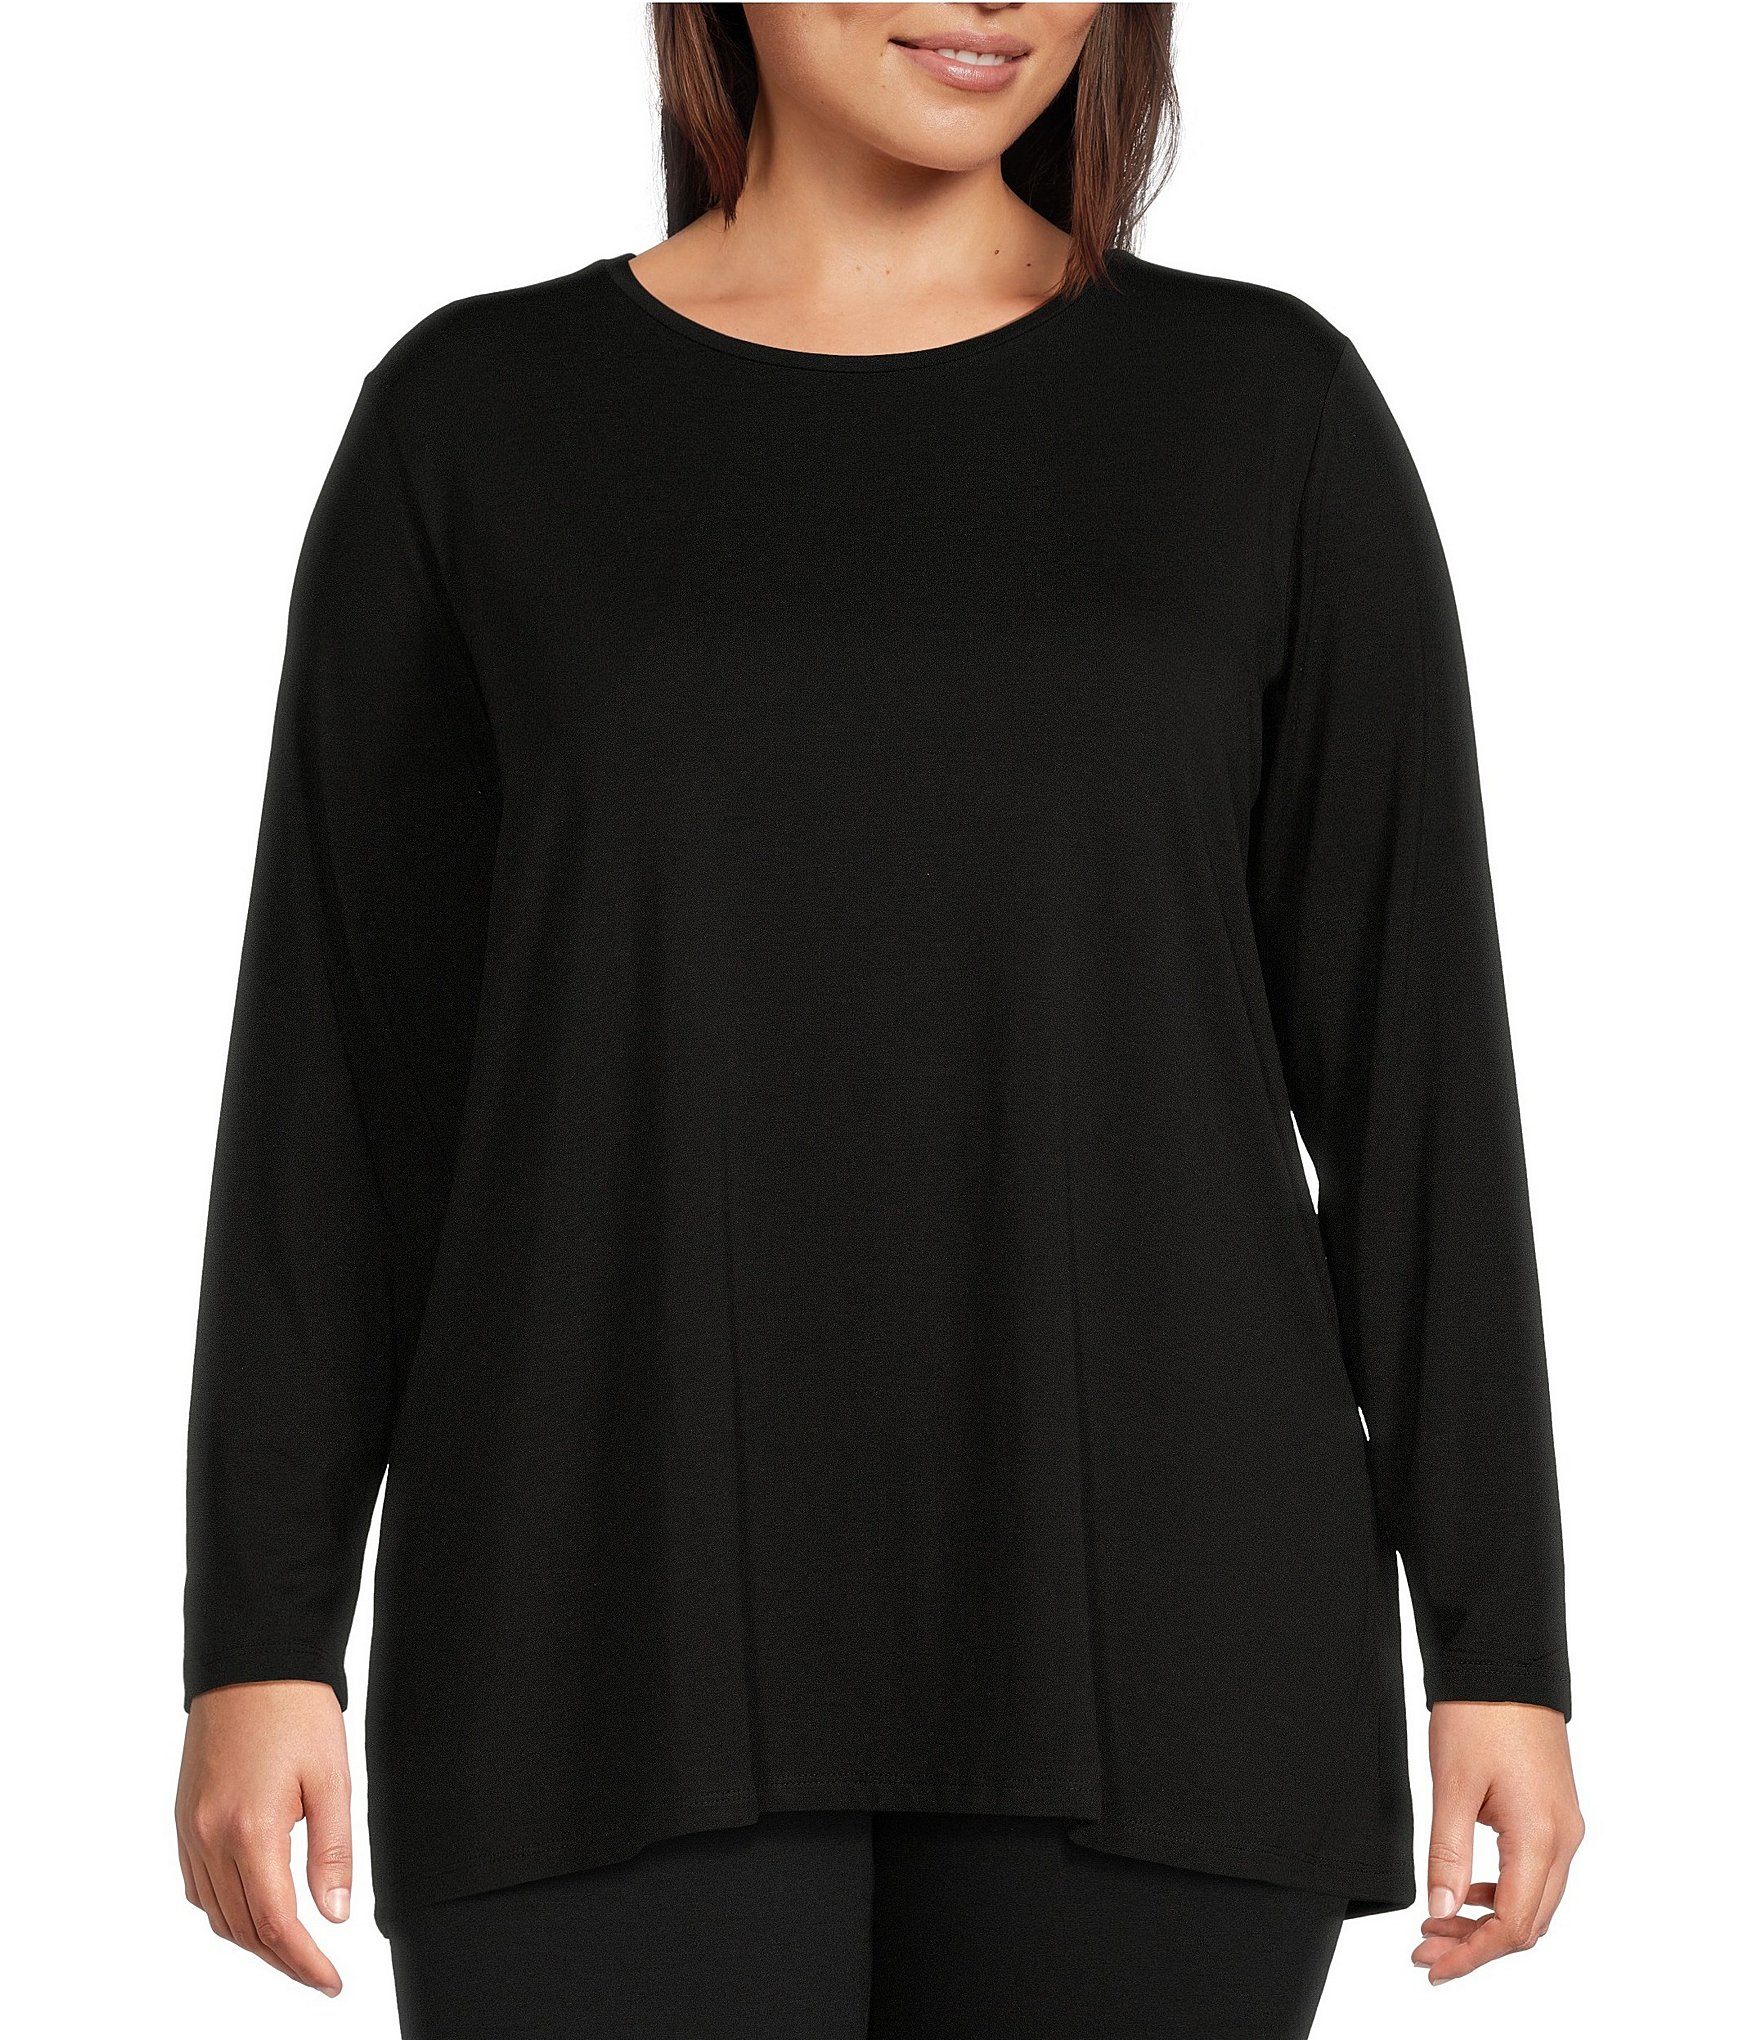 NEW Extra Pepper Black Stretch Long Sleeve Top Tunic Blouse Plus Size 22  #S8